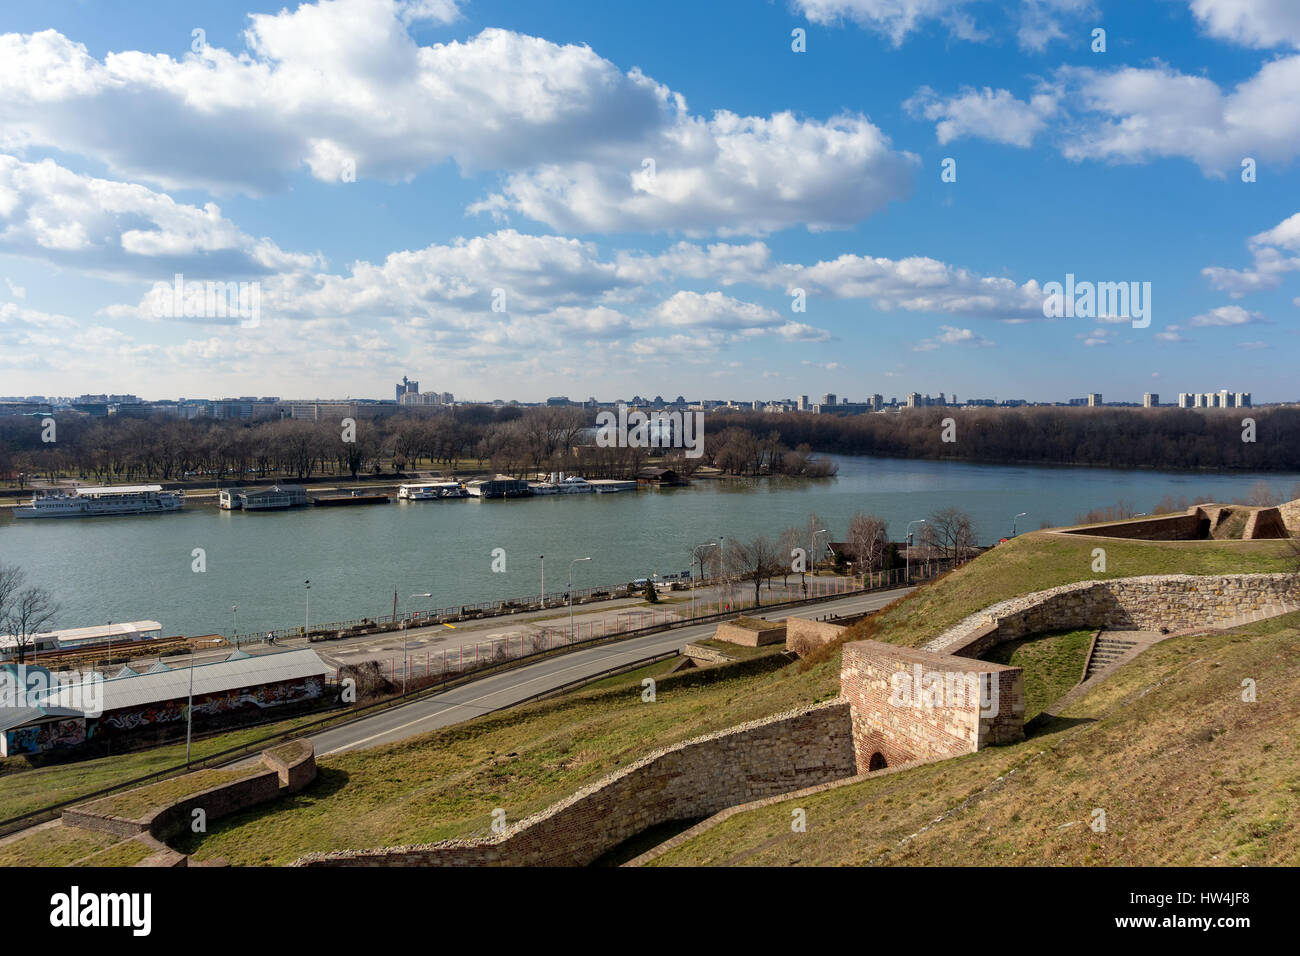 The confluence of Danube and Sava rivers in Belgrade, Serbia, as seen from the Kalemegdan fortress Stock Photo